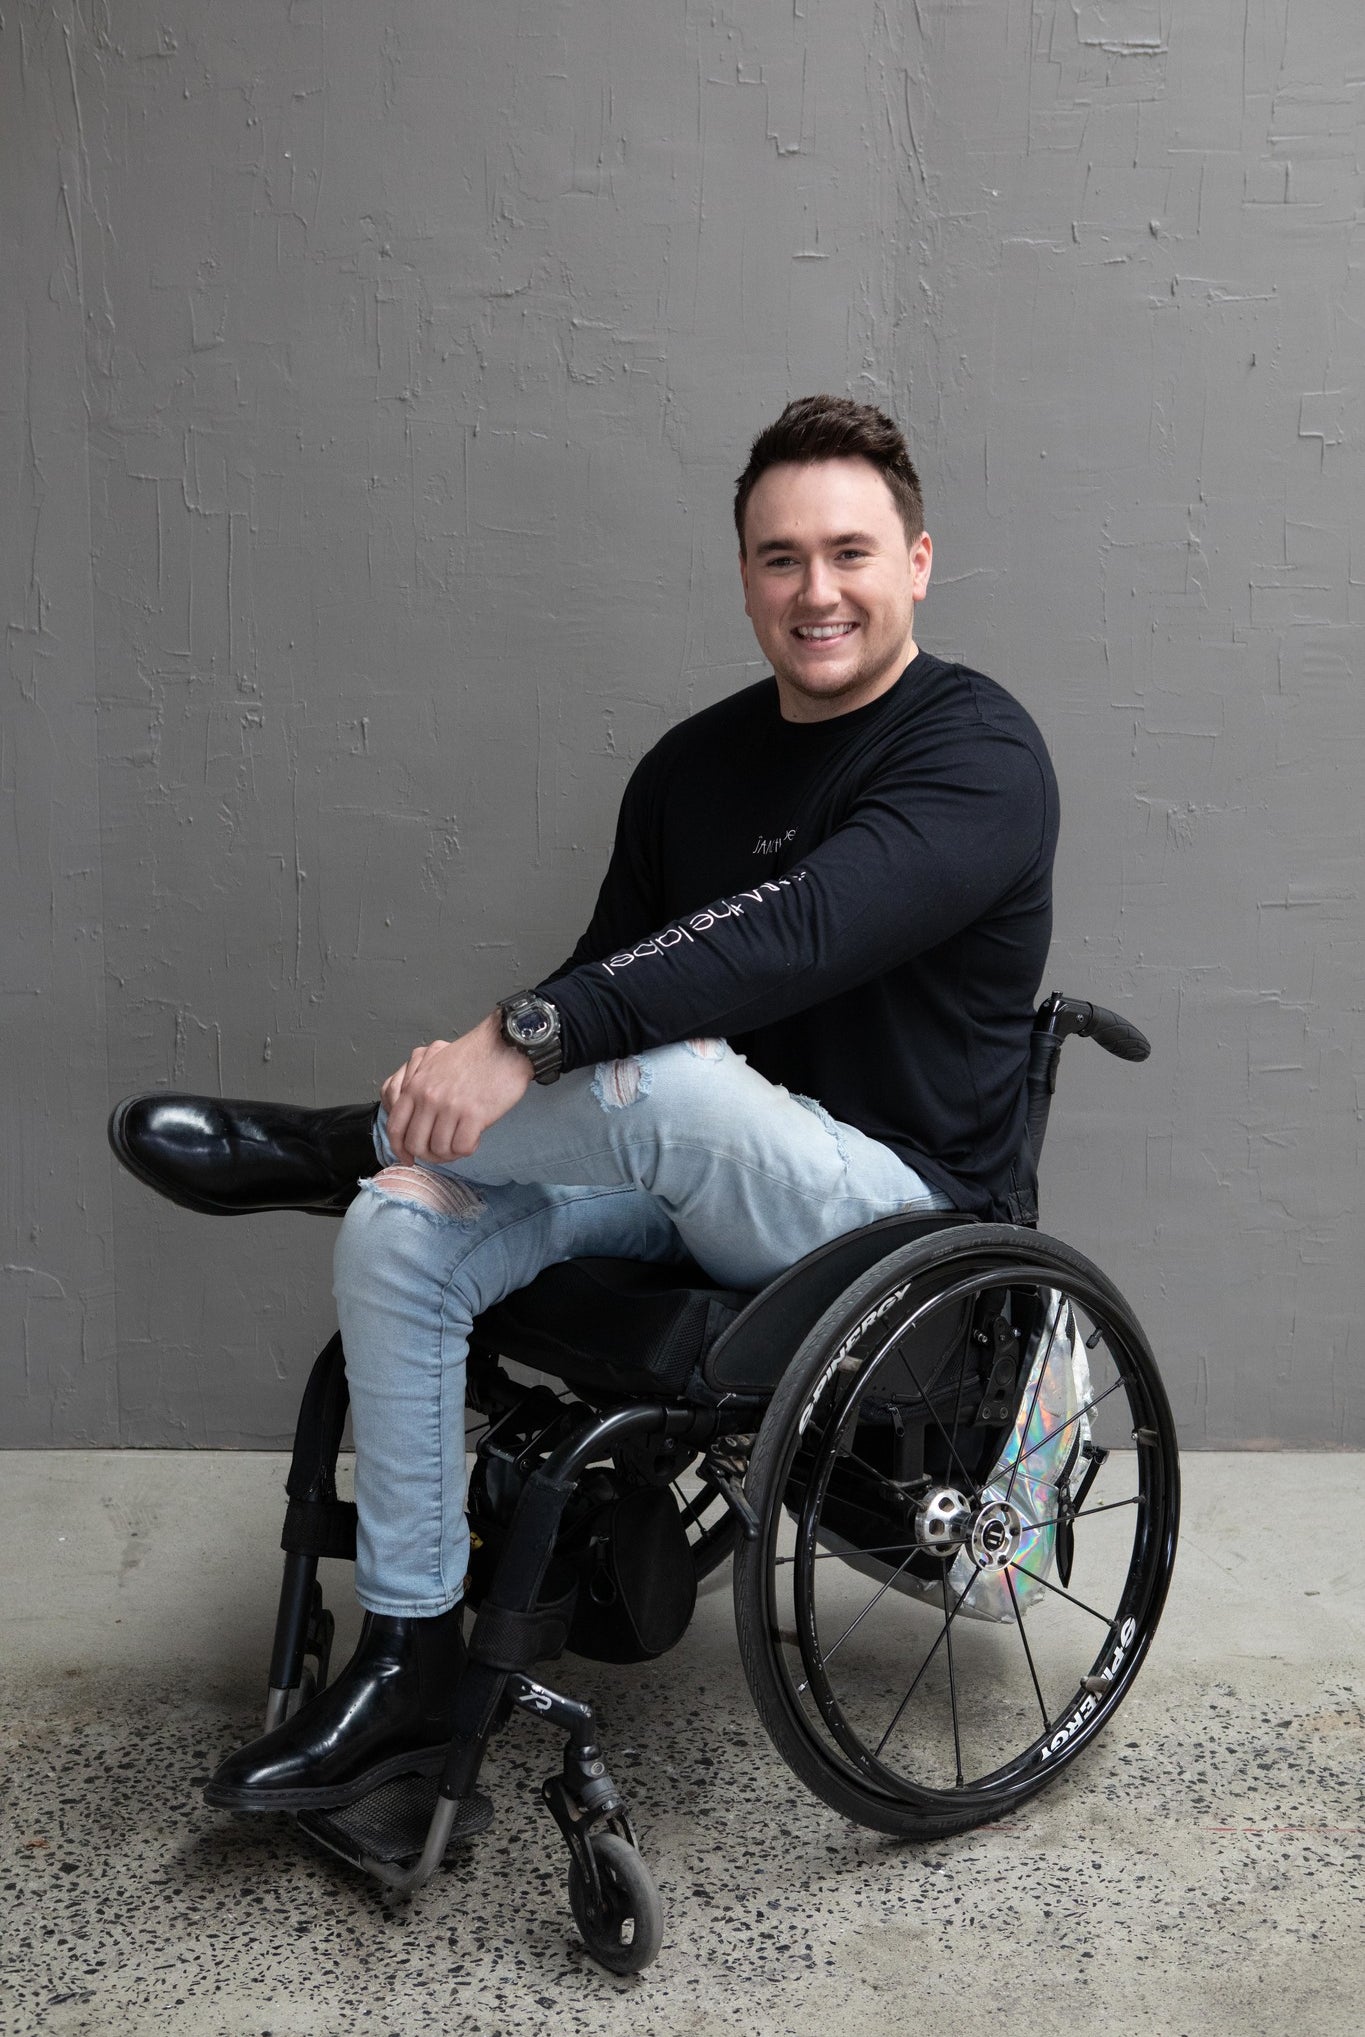 Jason, a white man with short brown hair, is sitting in his wheelchair and smiling. He is wearing a black long sleeve with the words "JAM the label" down the sleeve, ripped light blue jeans and black boots. One leg is crossed over the other. He is against a grey wall and the floor is concrete.